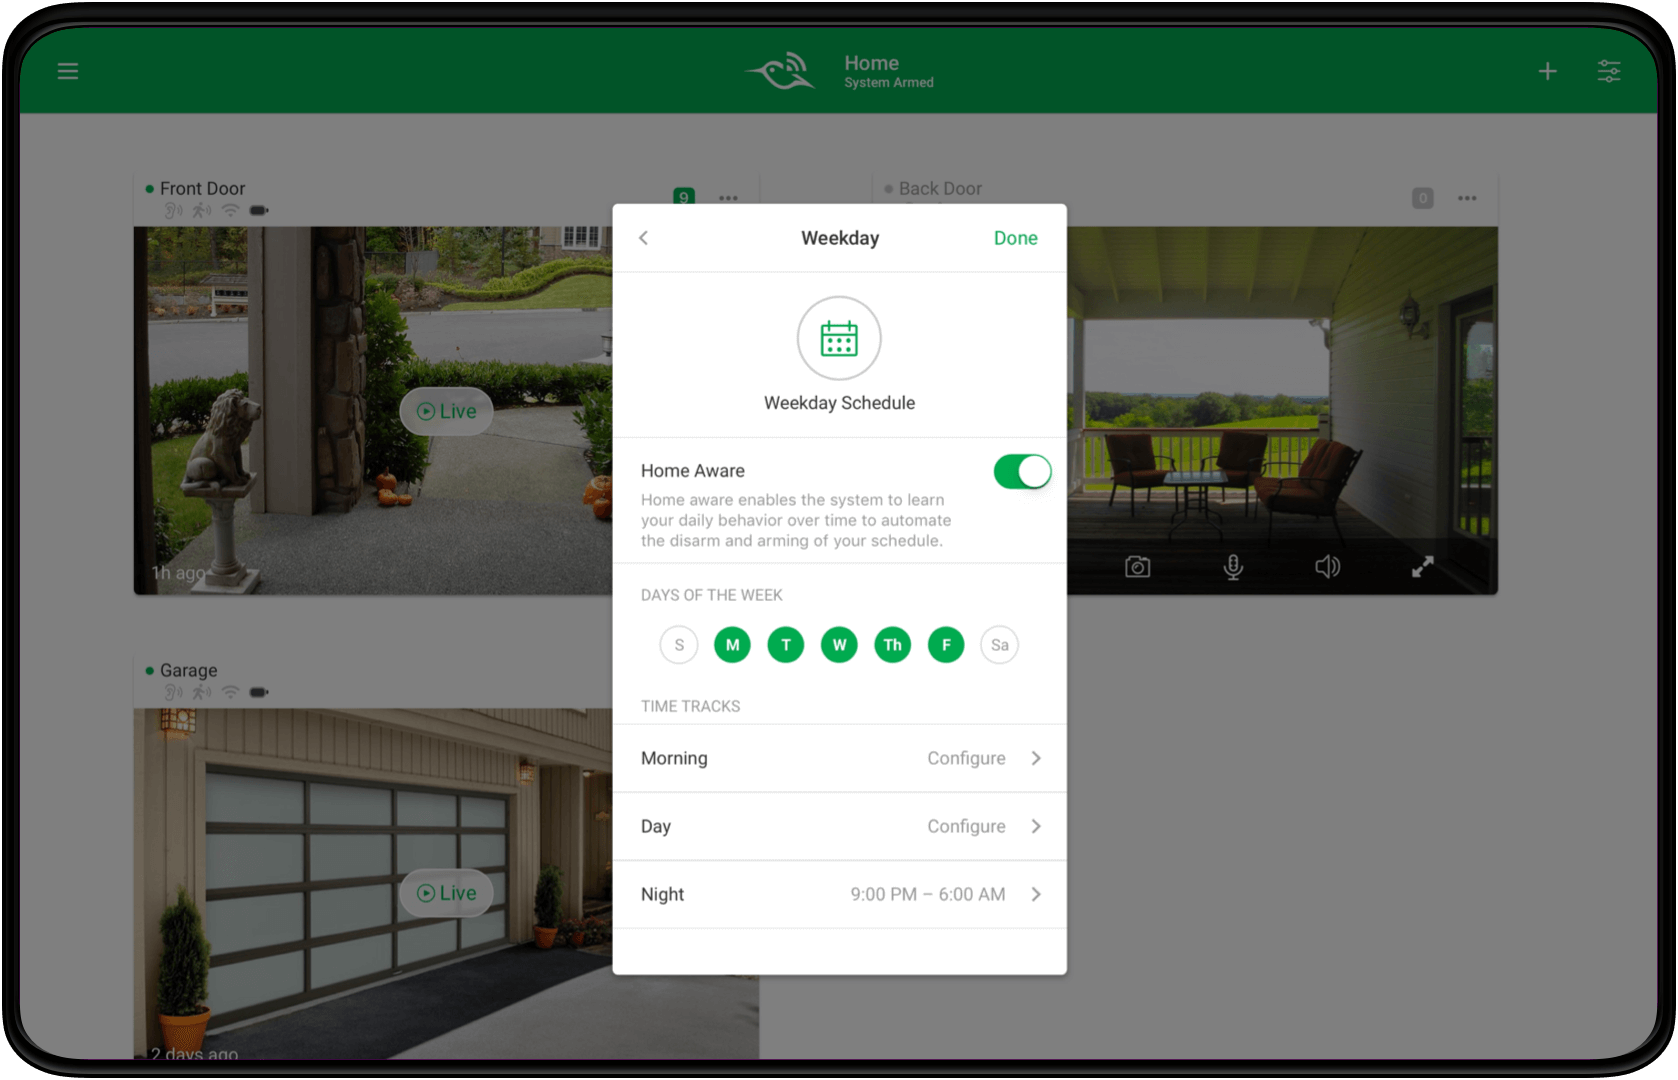 Design for a settings modal within the Arlo web app